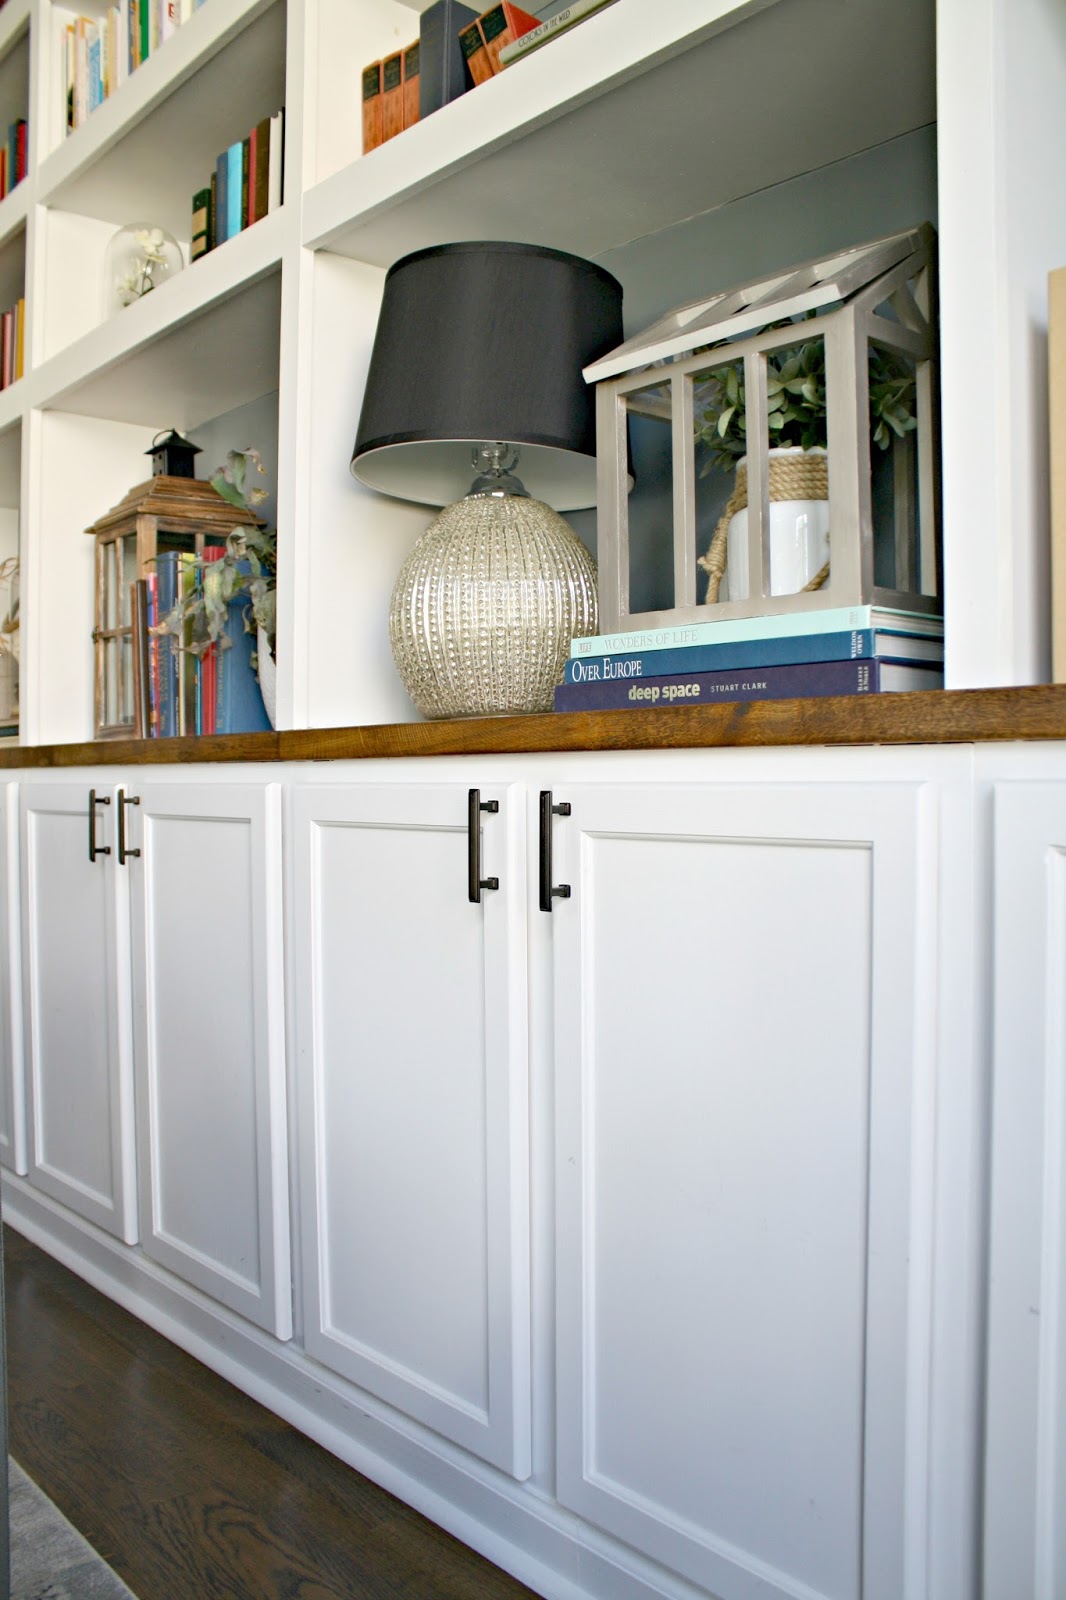 Diy Built Ins With Stock Cabinets, How To Make Built In Cabinets And Shelves